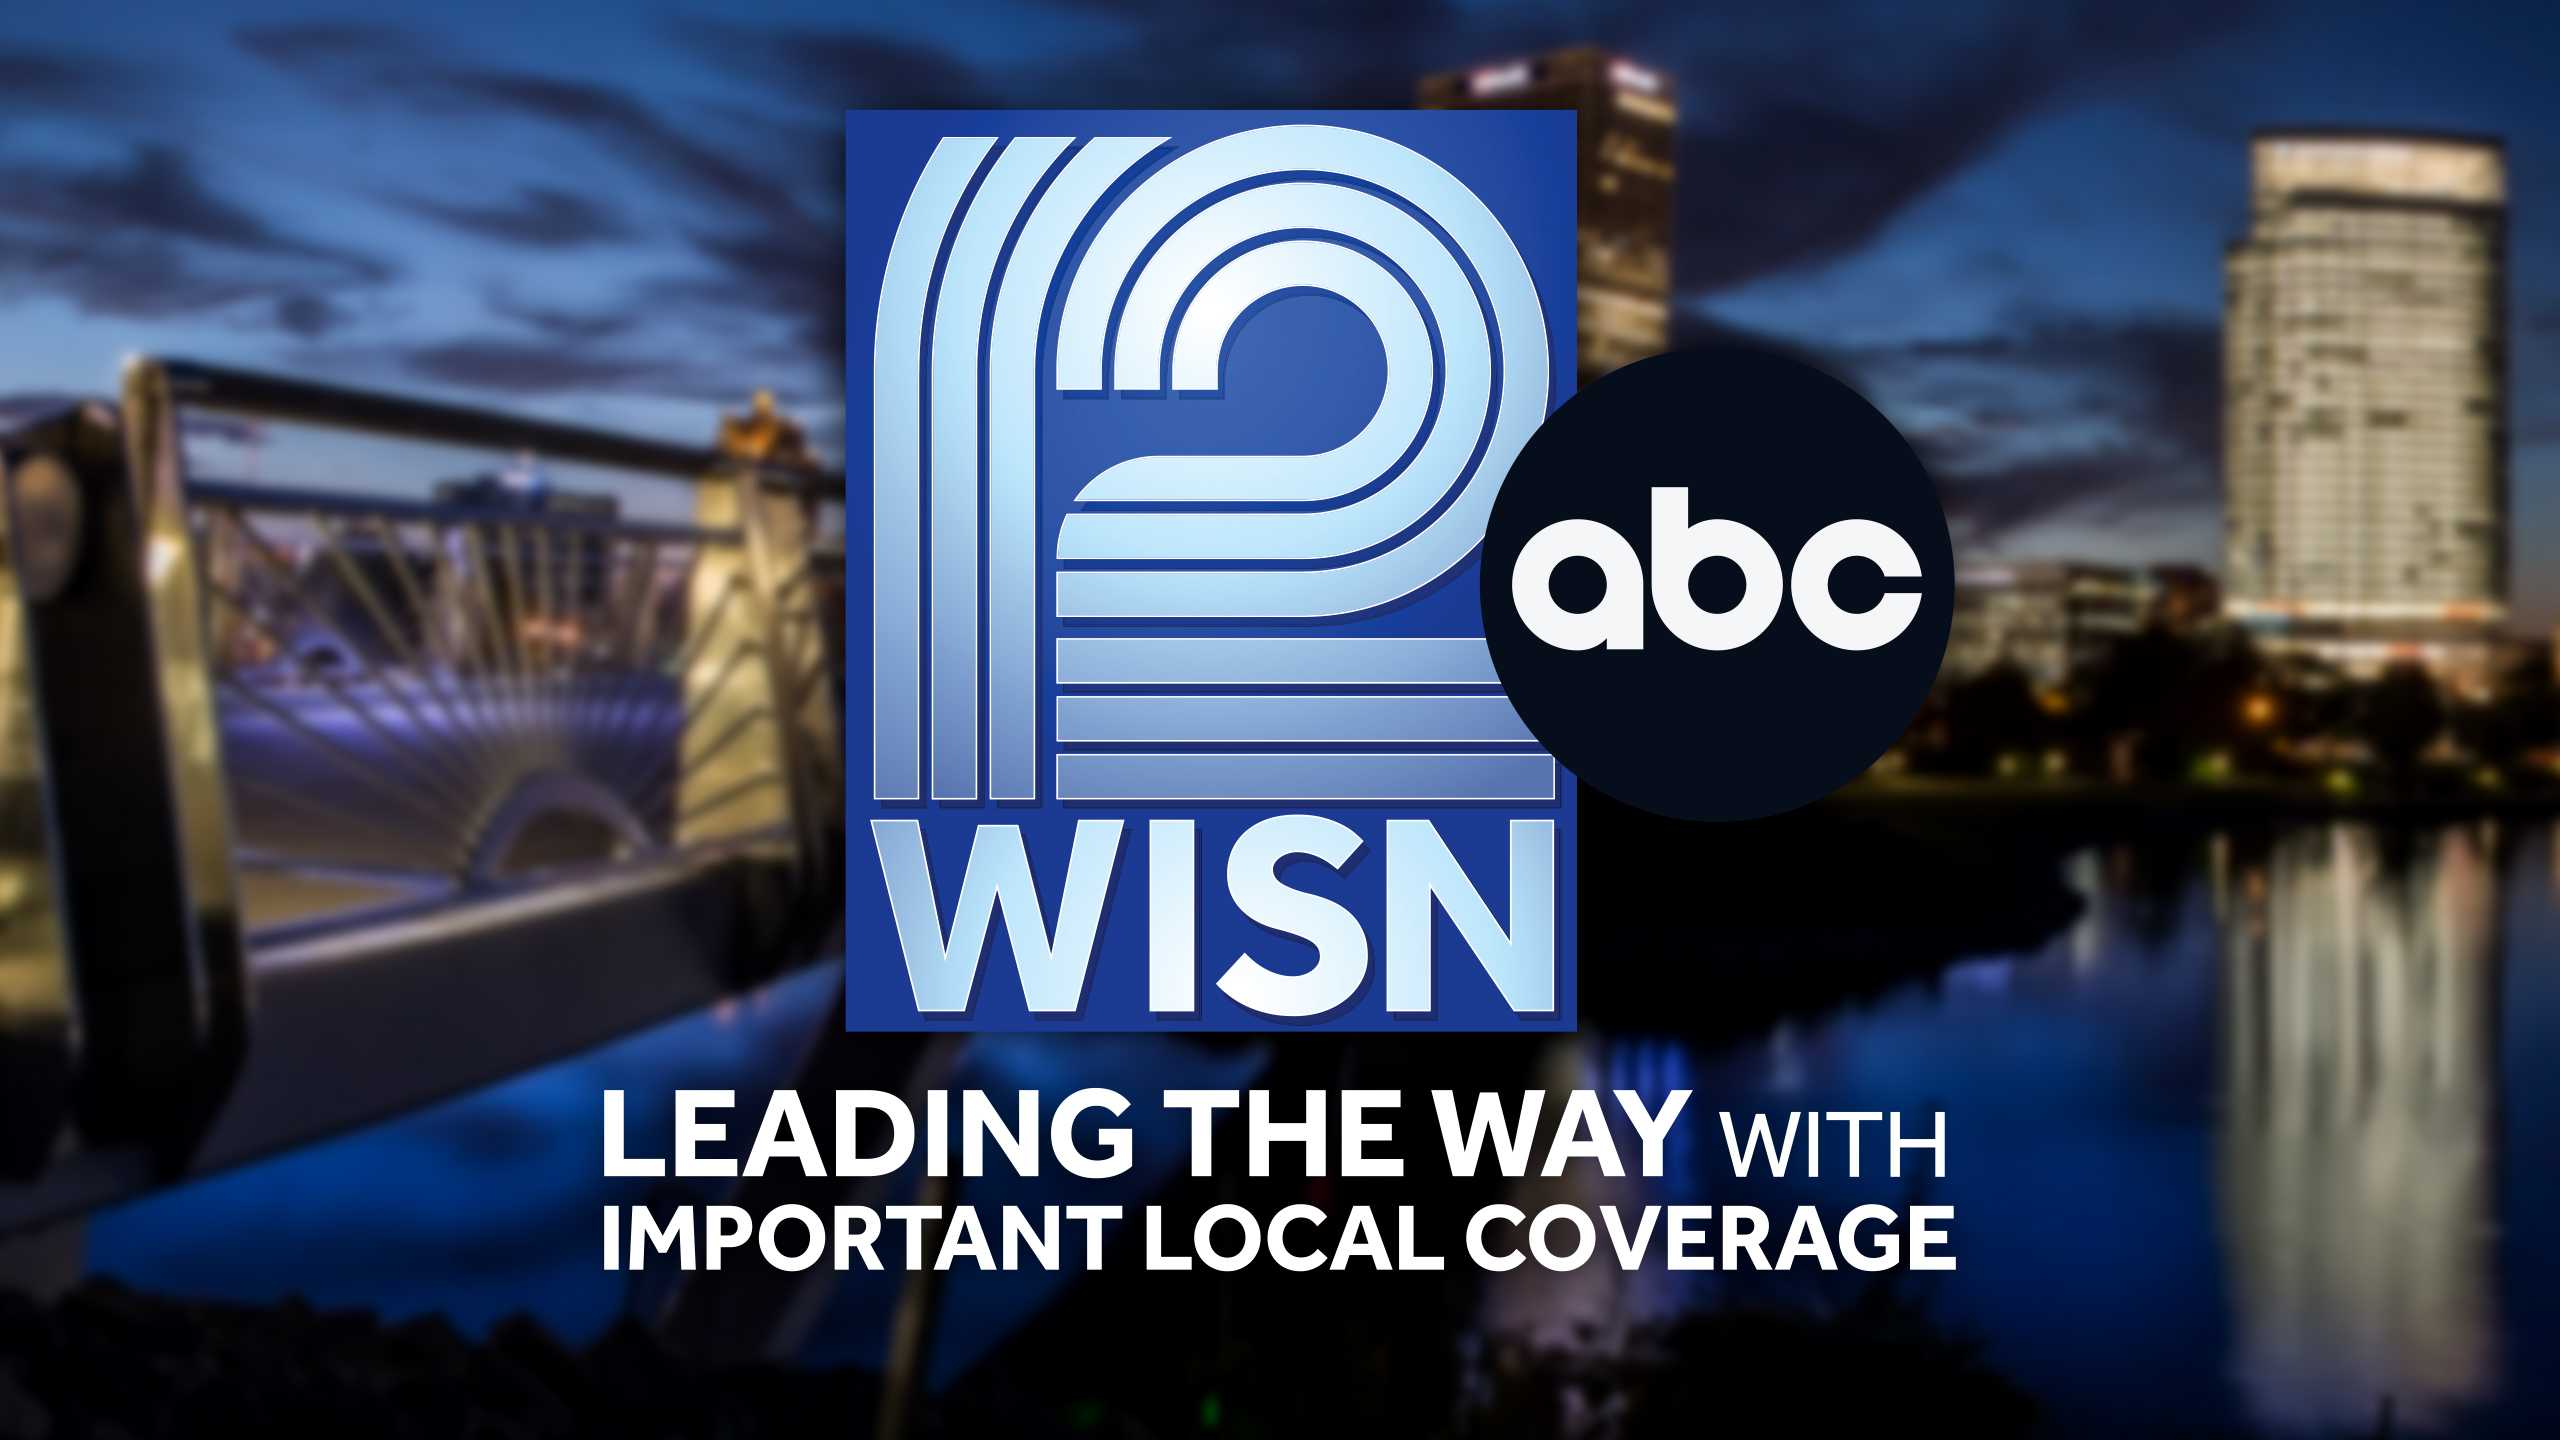 WISN 12 Leads Local Evening News Race Among P25-54 in May